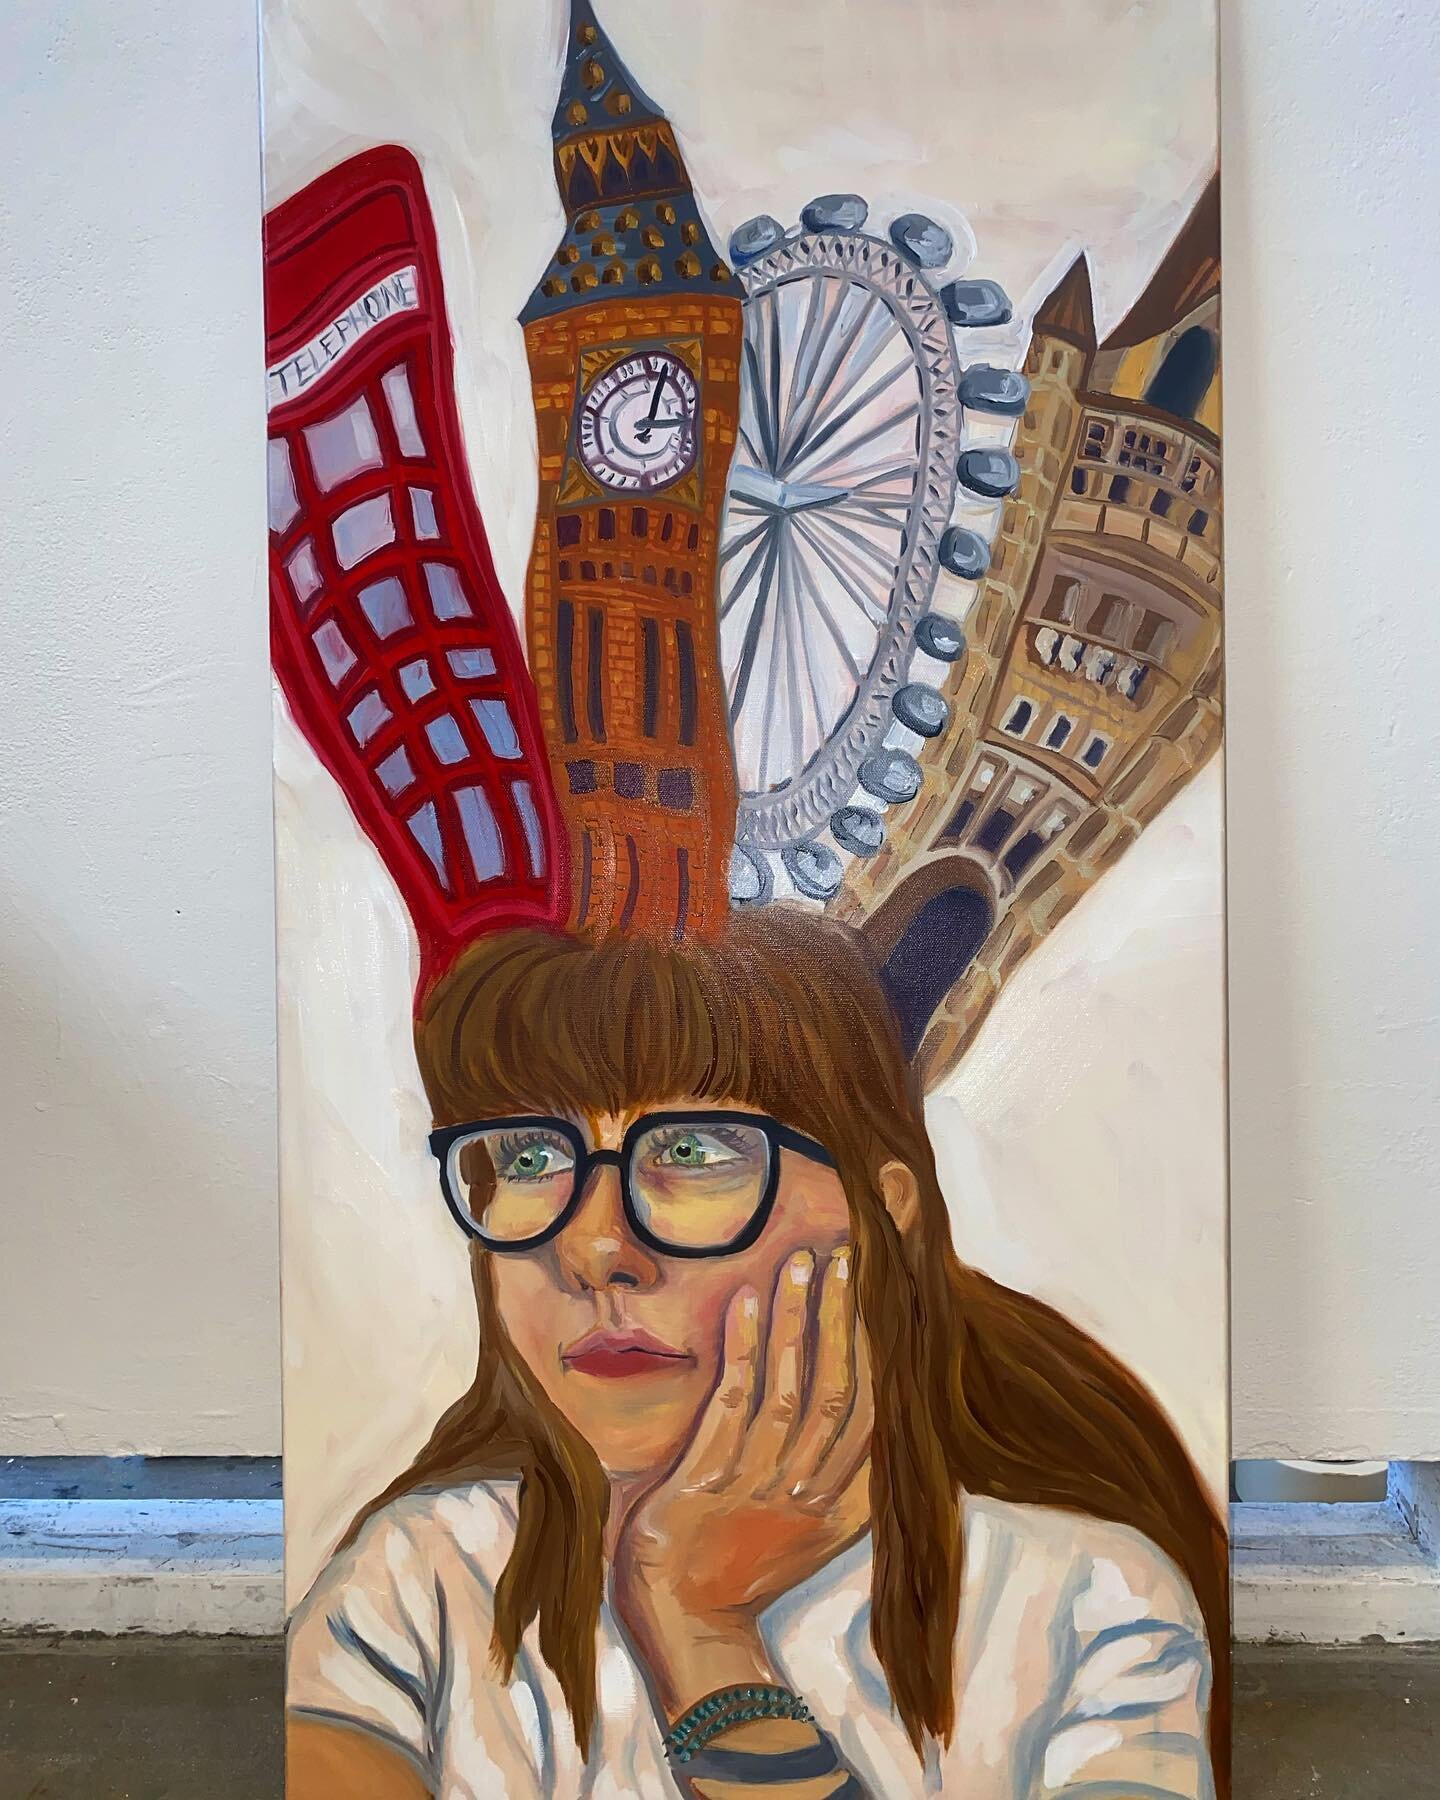 London on my mind 🇬🇧
.
Reflecting on my first month of living abroad with my first piece of the term 😁🤍🥳 very happy with this wonky start.. now off to the next 🌍
.
.
.
#artist #artistabroad #selfportrait #portrait #oilpainter #oilpainting #pain